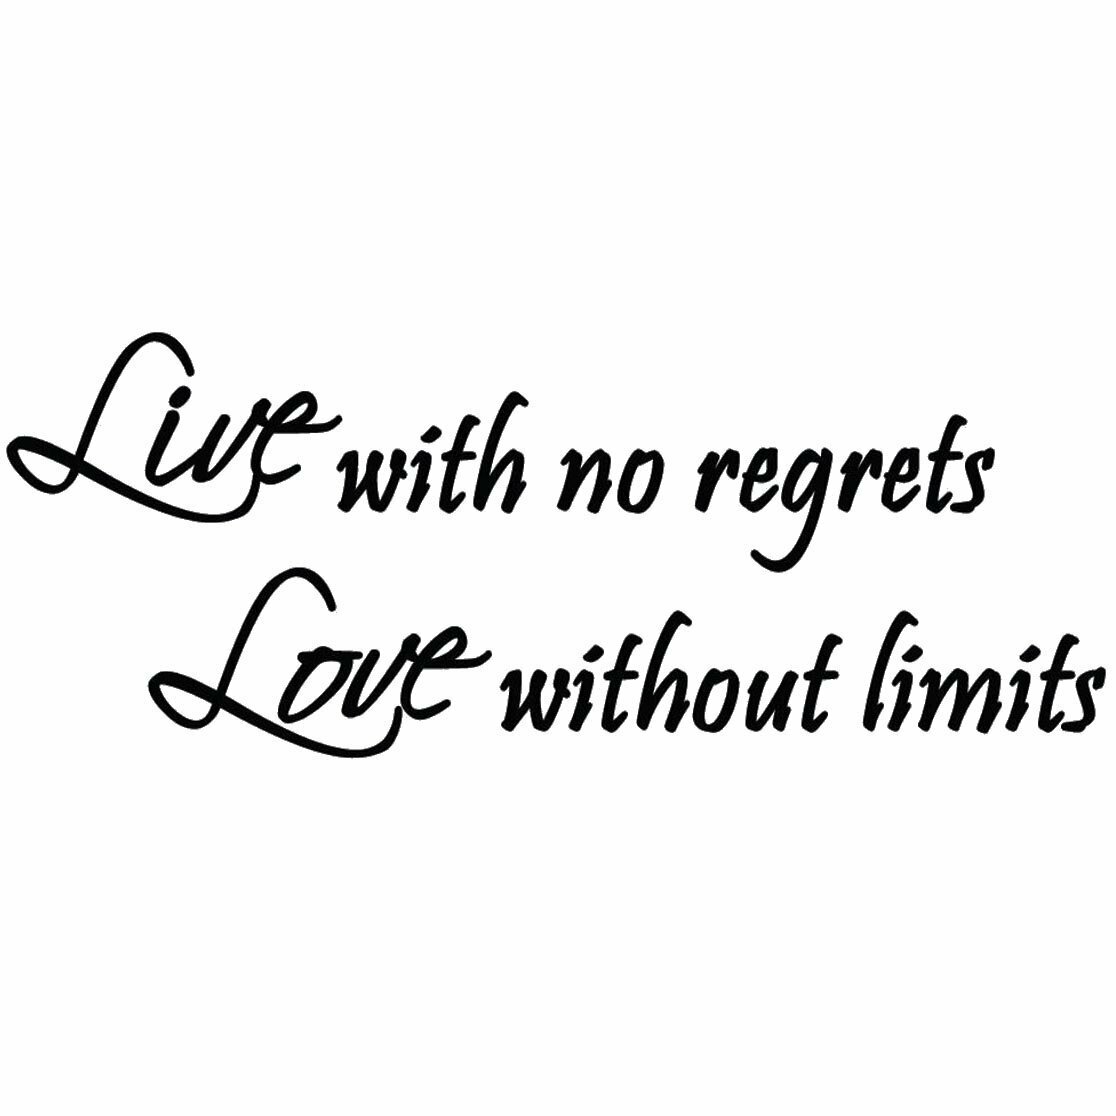 Home And Garden Love Has No Limits Safe Word Bdsm 4 Vinyl Decal Car Window Wall Decor Adult 